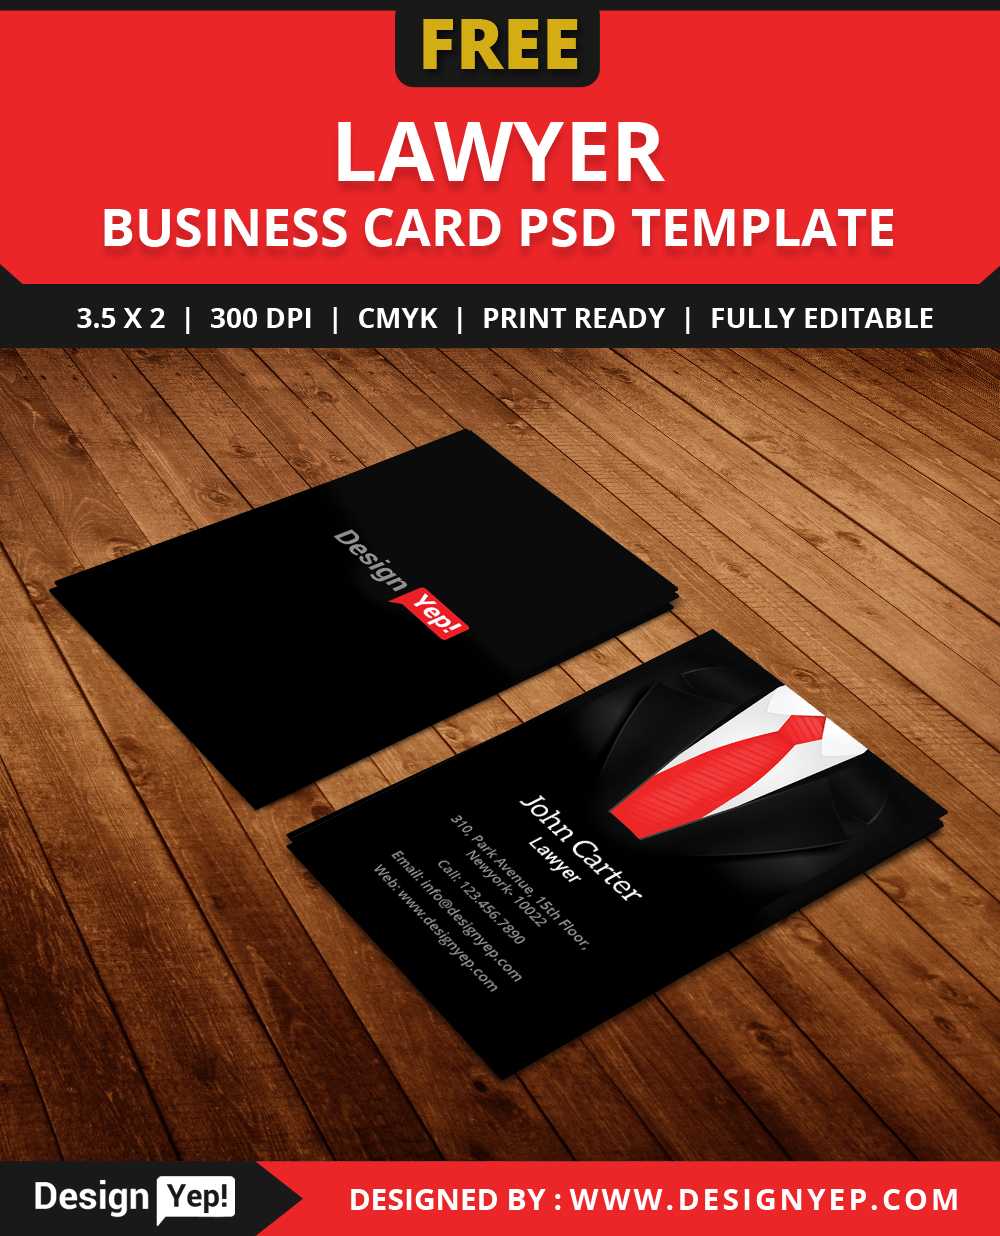 Free Lawyer Business Card Template Psd – Designyep Regarding Legal Business Cards Templates Free